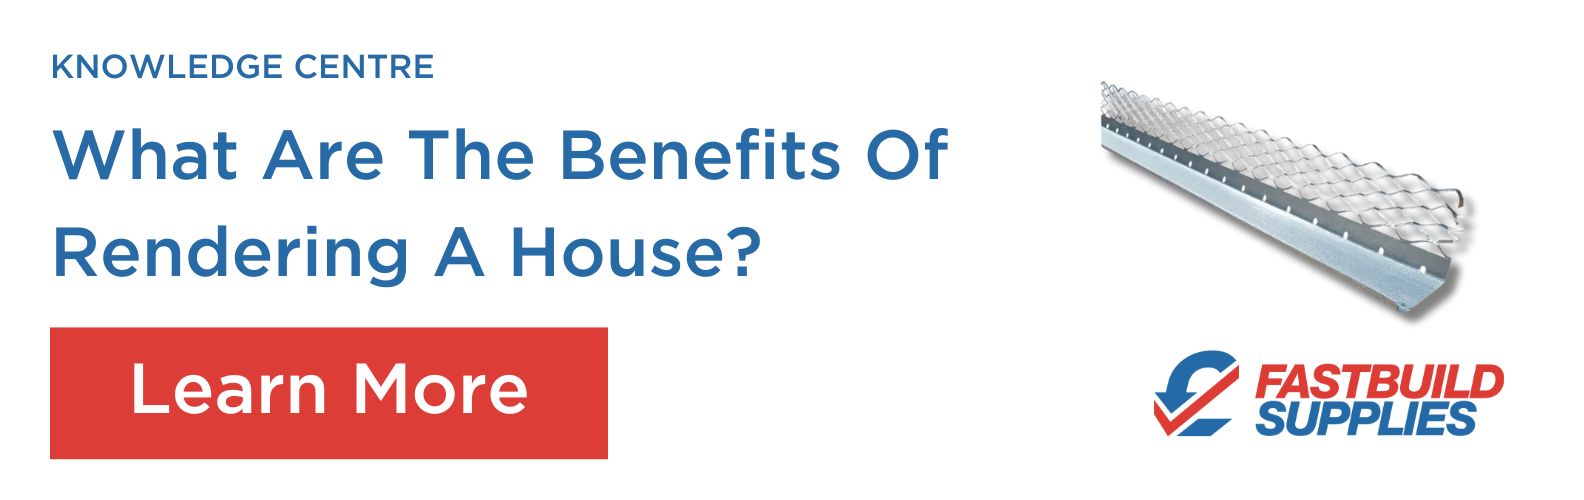 What Are The Benefits Of Rendering A House?